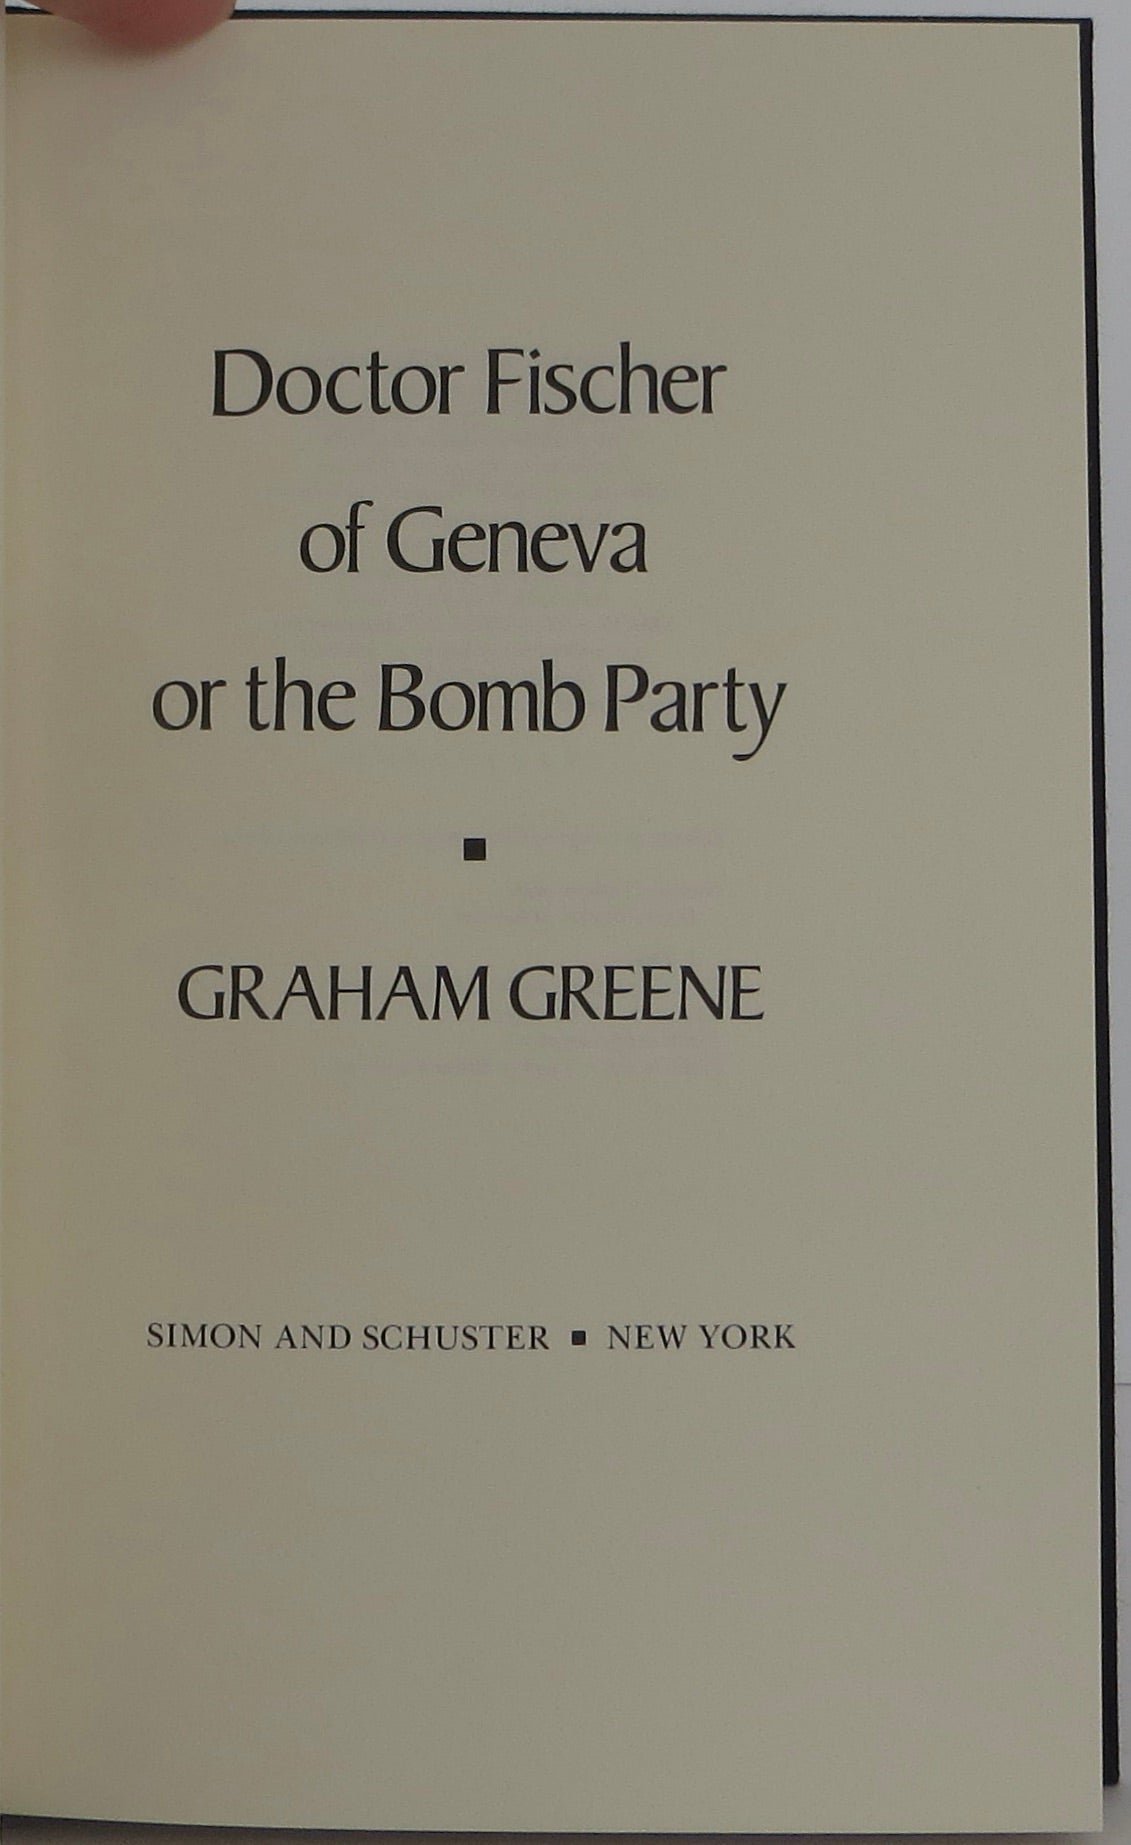 DOCTOR FISCHER OF GENEVA: Or, THE BOMB PARTY